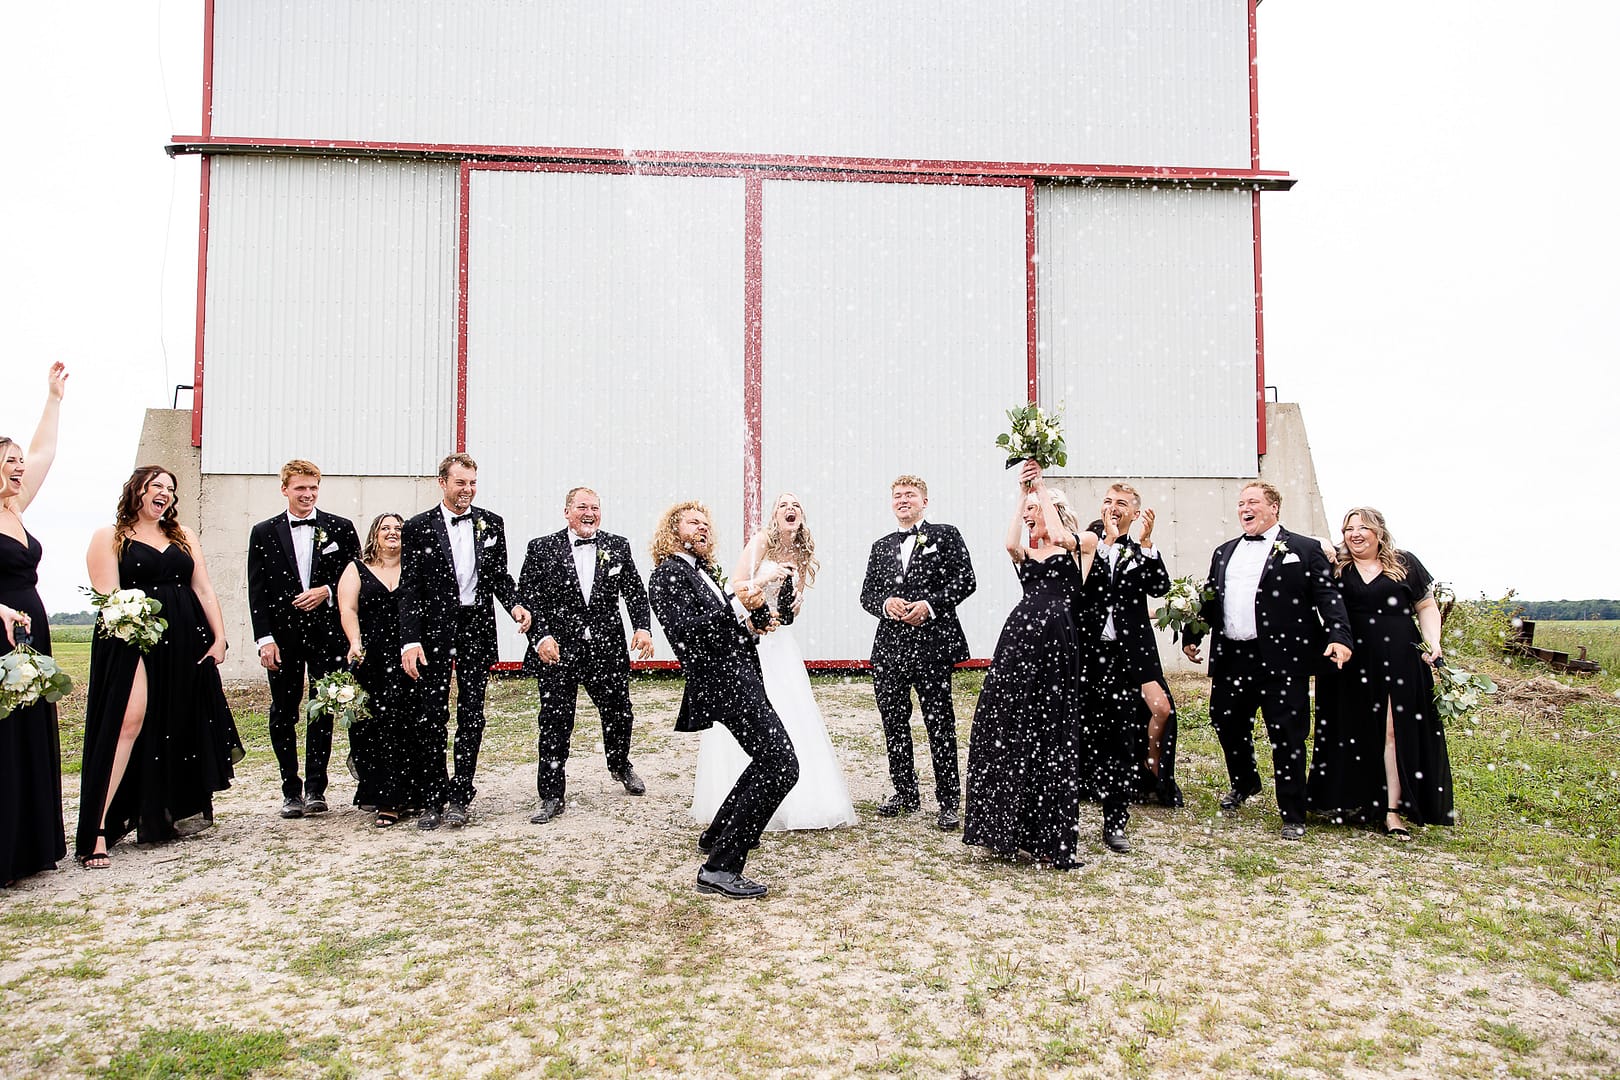 What does a typical wedding day look like?